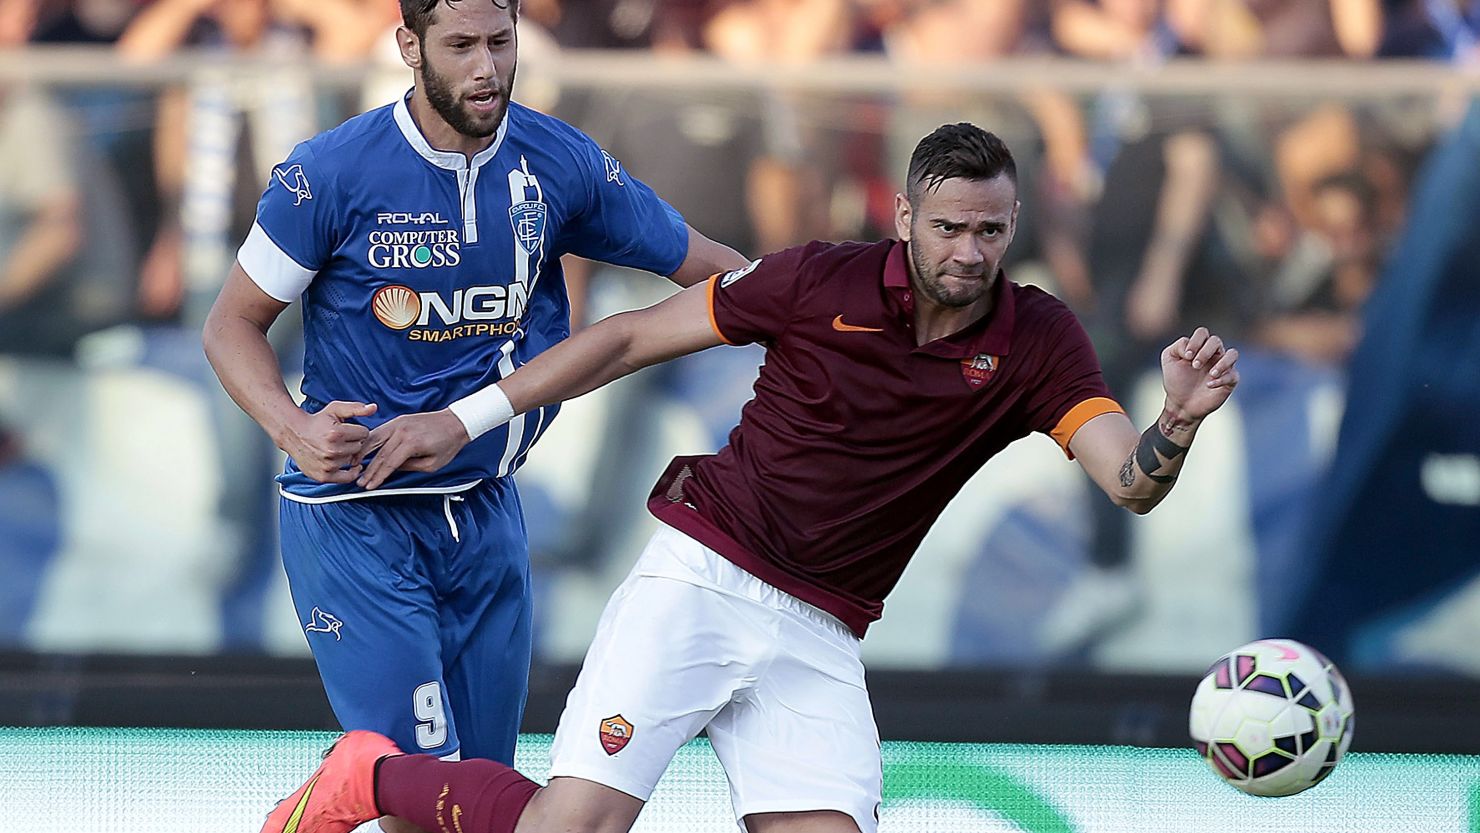 Leandro Castan was taken off against Empoli after complaining of dizziness.